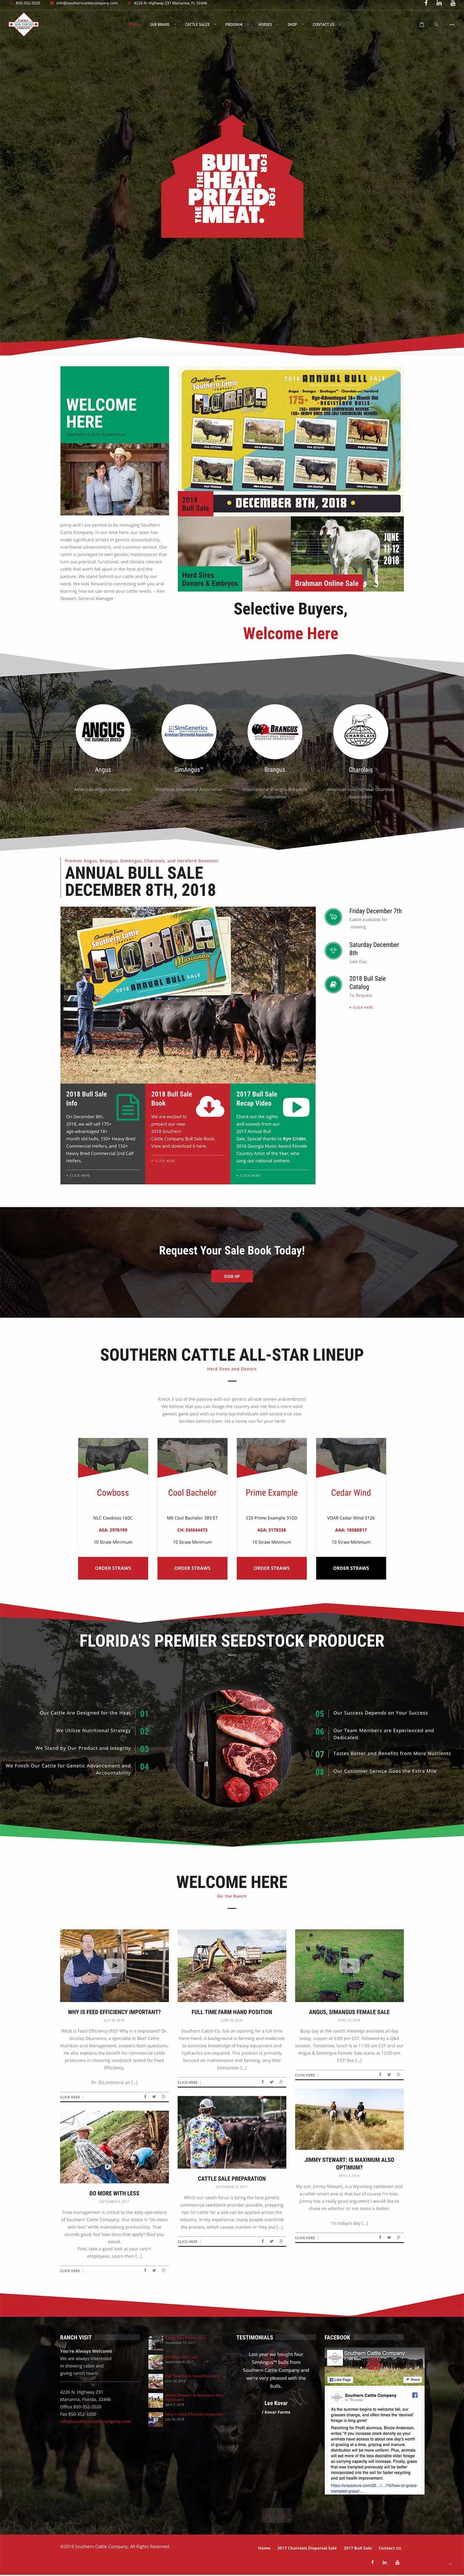 southern-cattle-company-website-landing-page